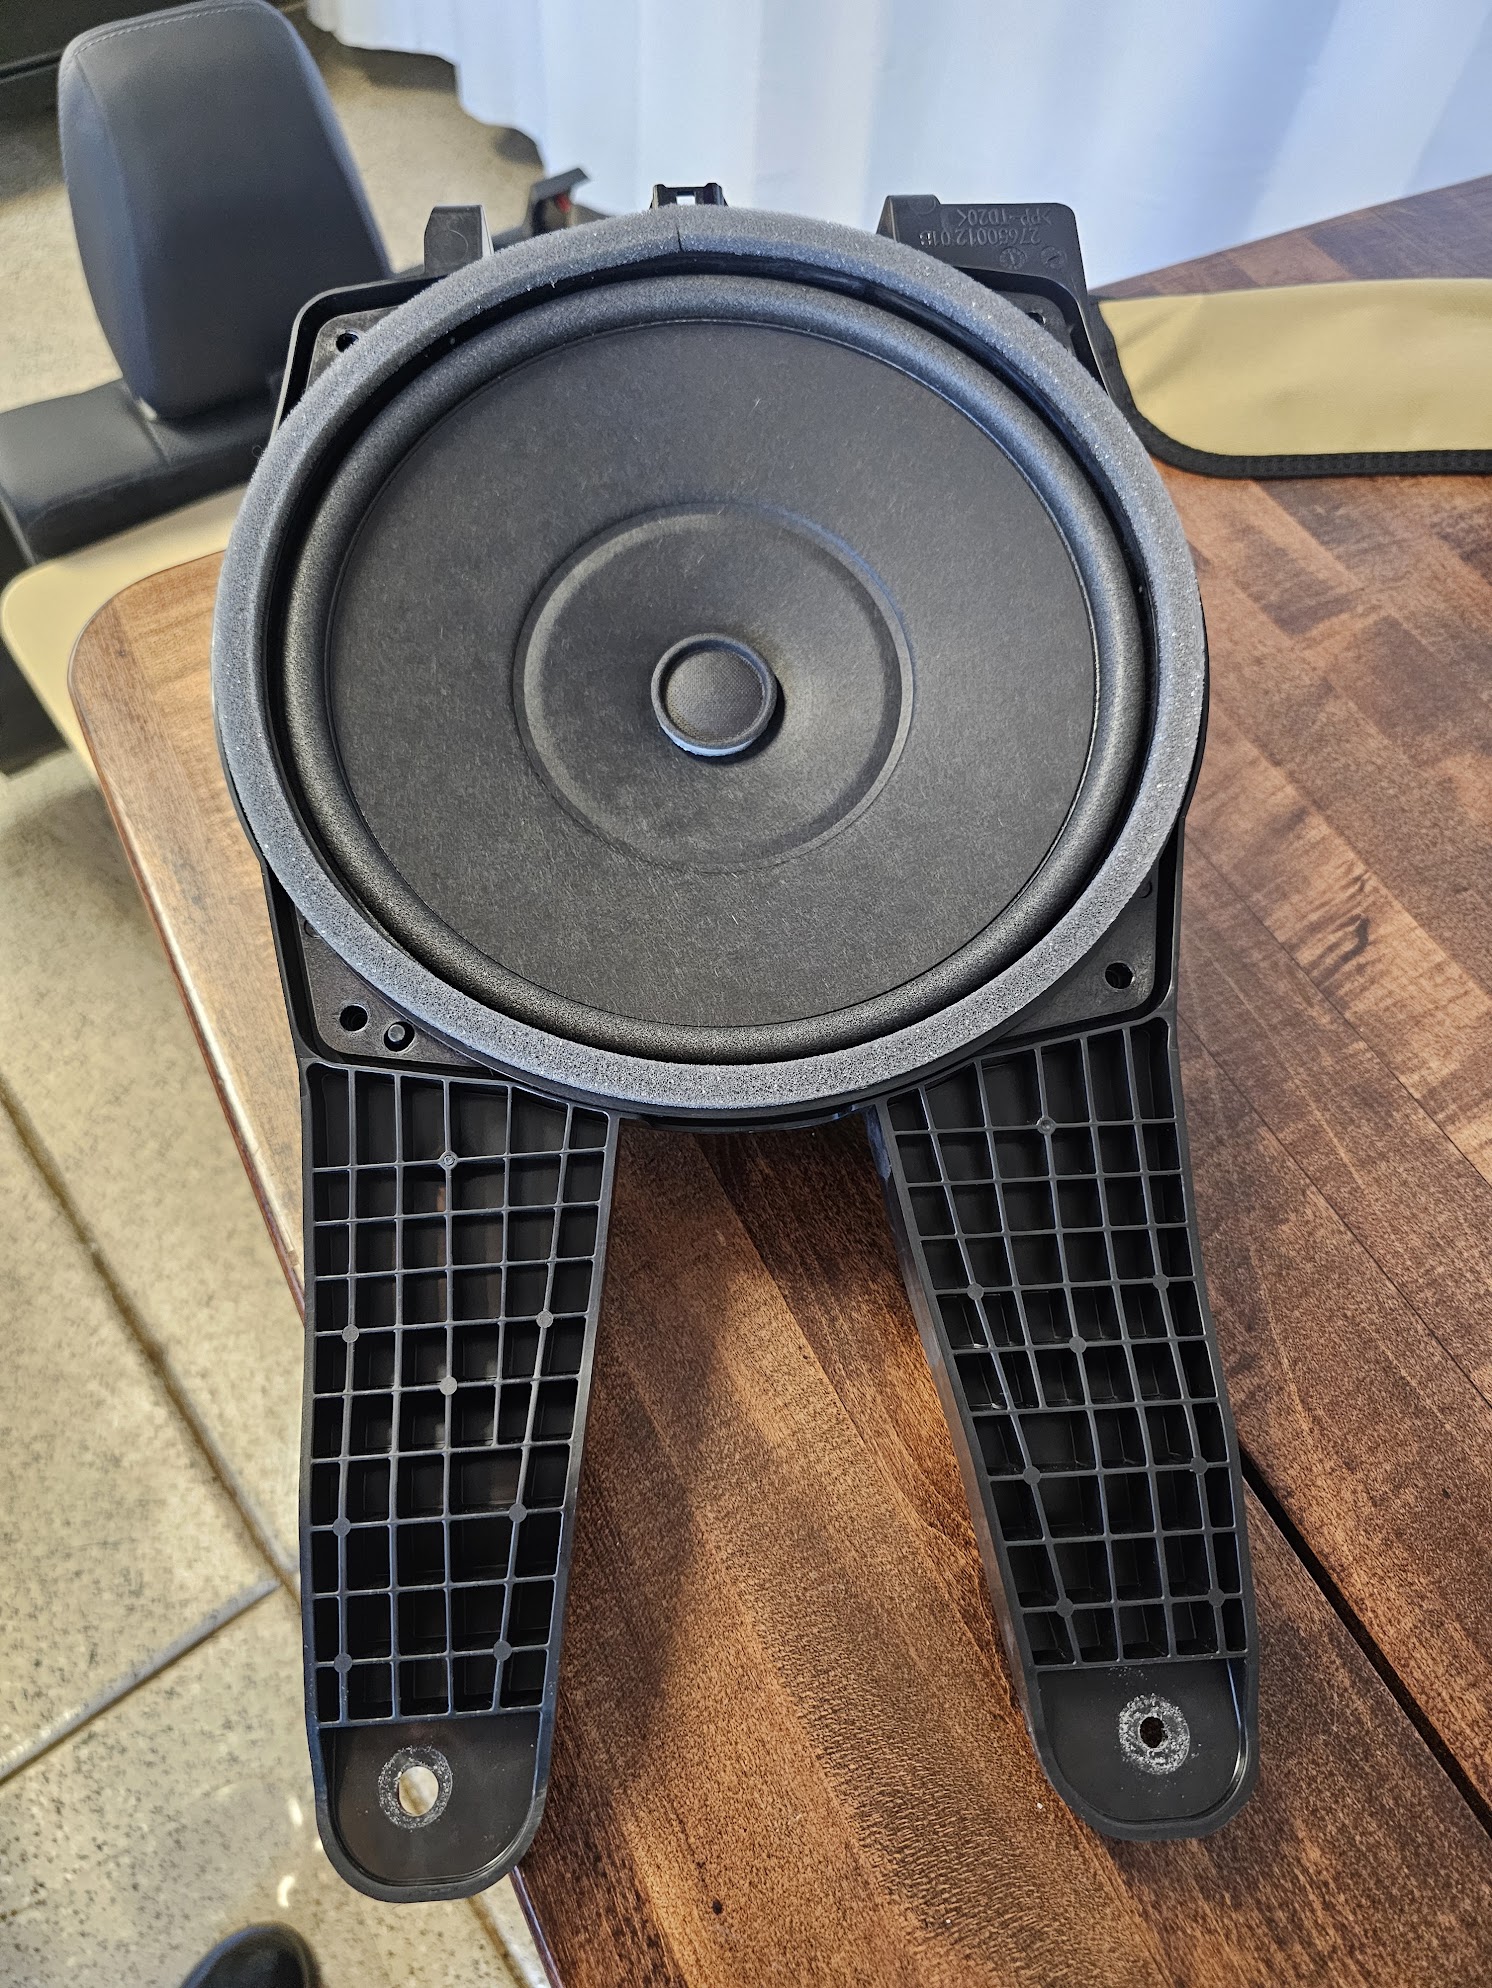 2024 Tacoma Dimensions of factory JBL 8" Subwoofer? [updated with measurements of 6" speakers and 10" subwoofer] 20240421_150506